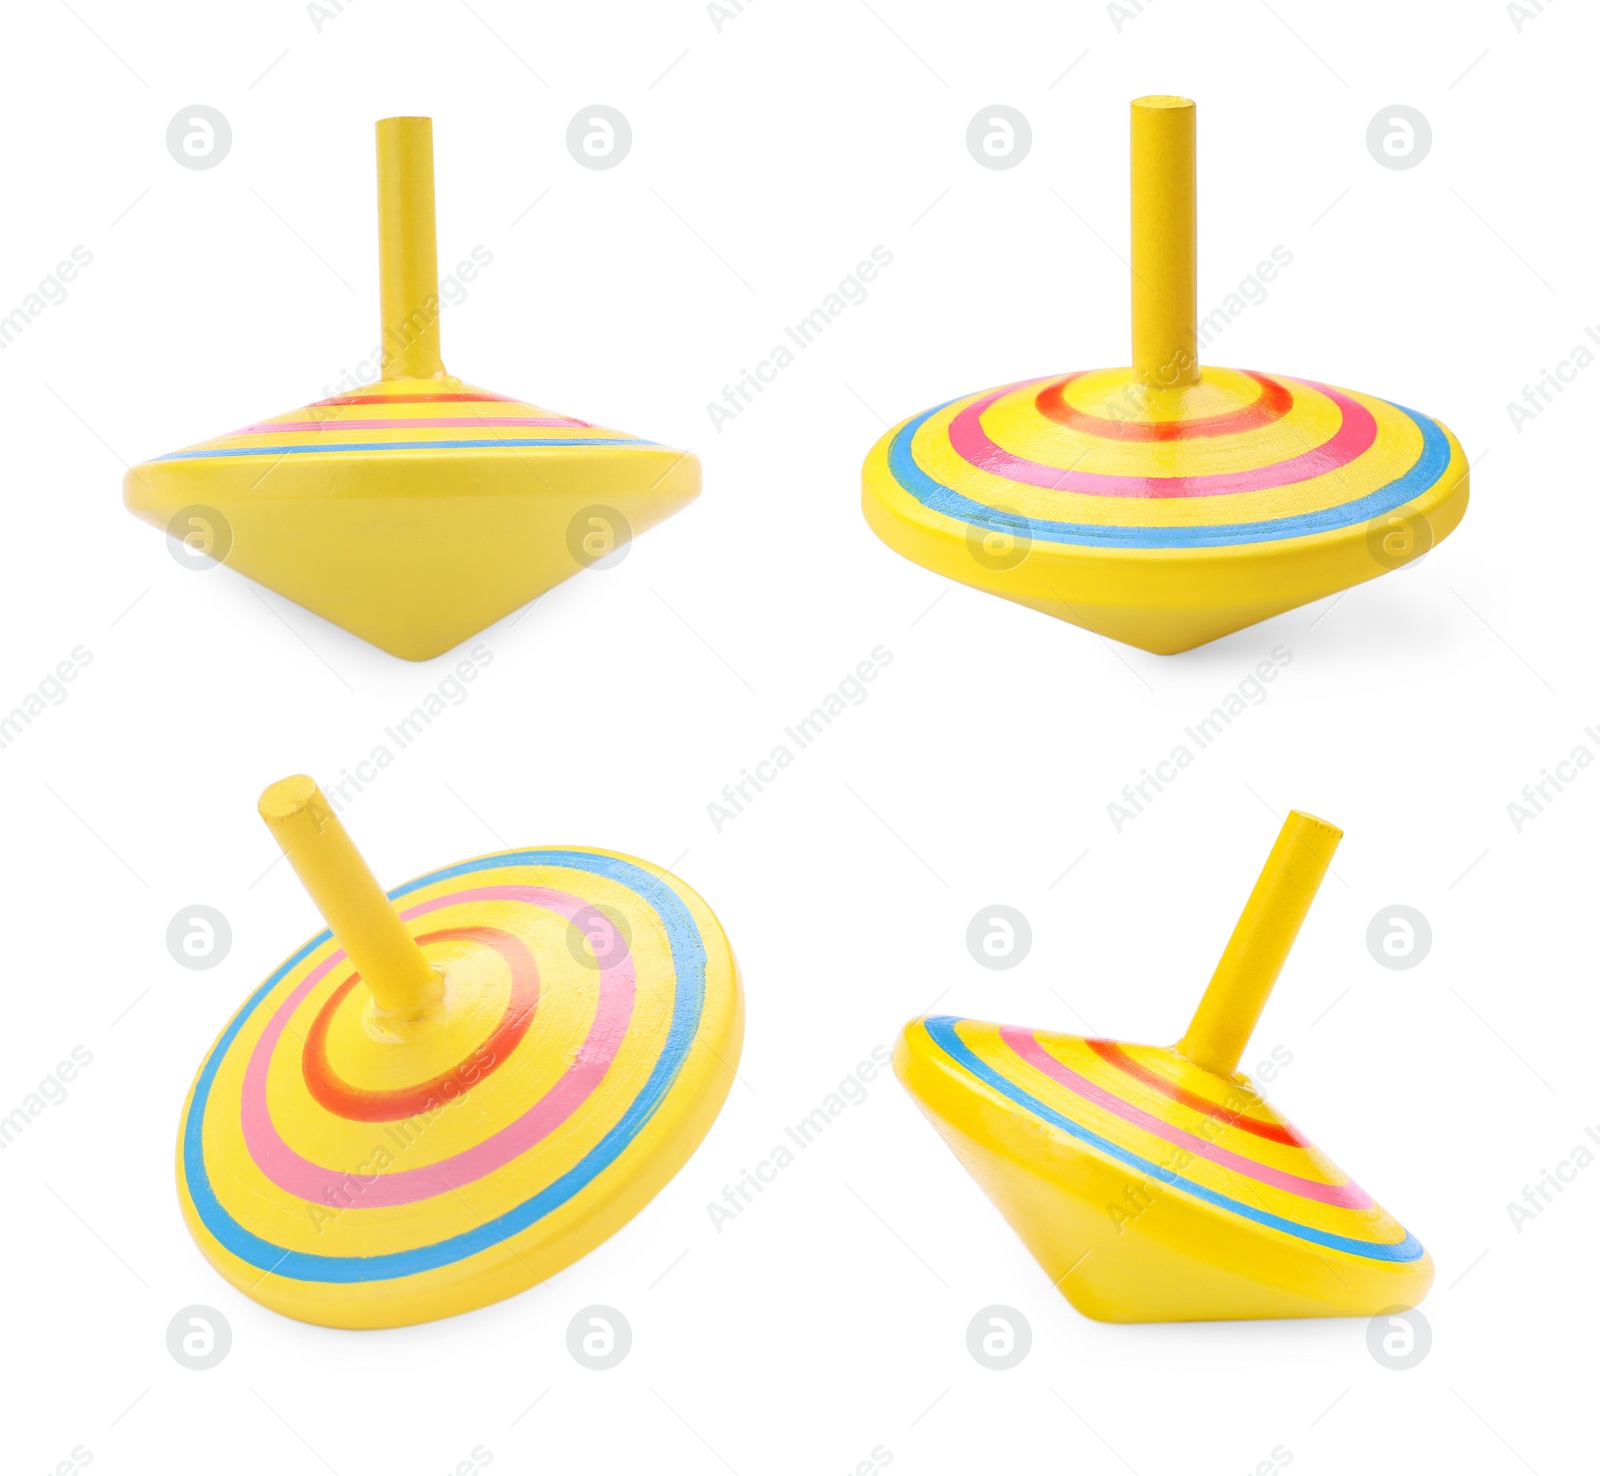 Image of Yellow spinning tops isolated on white. Toy whirligig